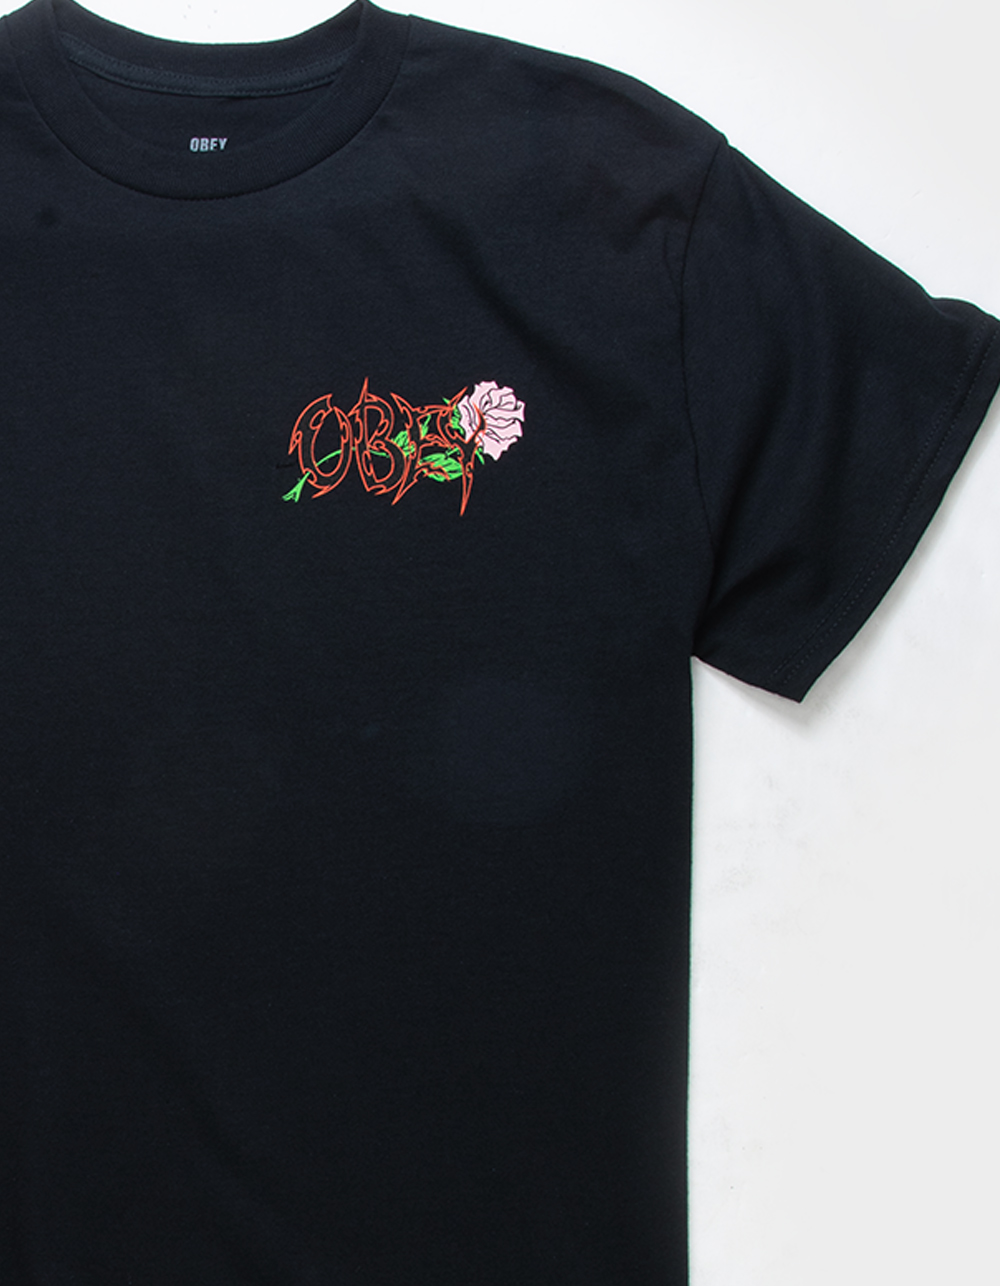 OBEY Thorns And Roses Mens Tee - BLACK | Tillys